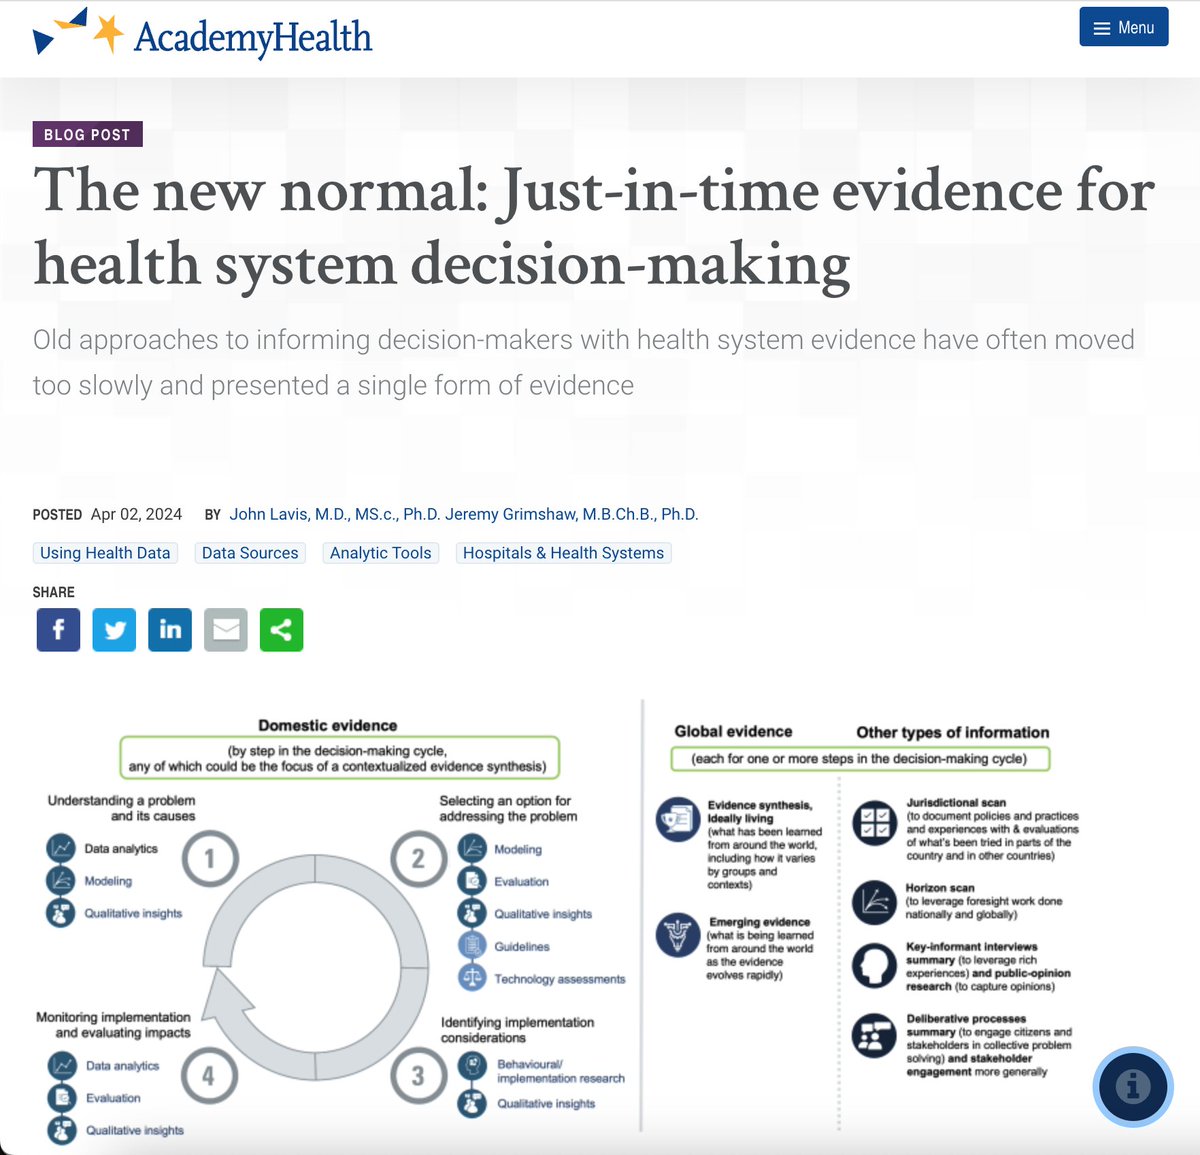 Old approaches to informing decision-makers with health system evidence have often moved too slowly and presented a single form of evidence. Read more in this @AcademyHealth blog post by @EvidenceComm secretariat co-leads @lavisjn & @GrimshawJeremy ow.ly/TGf950R8mux